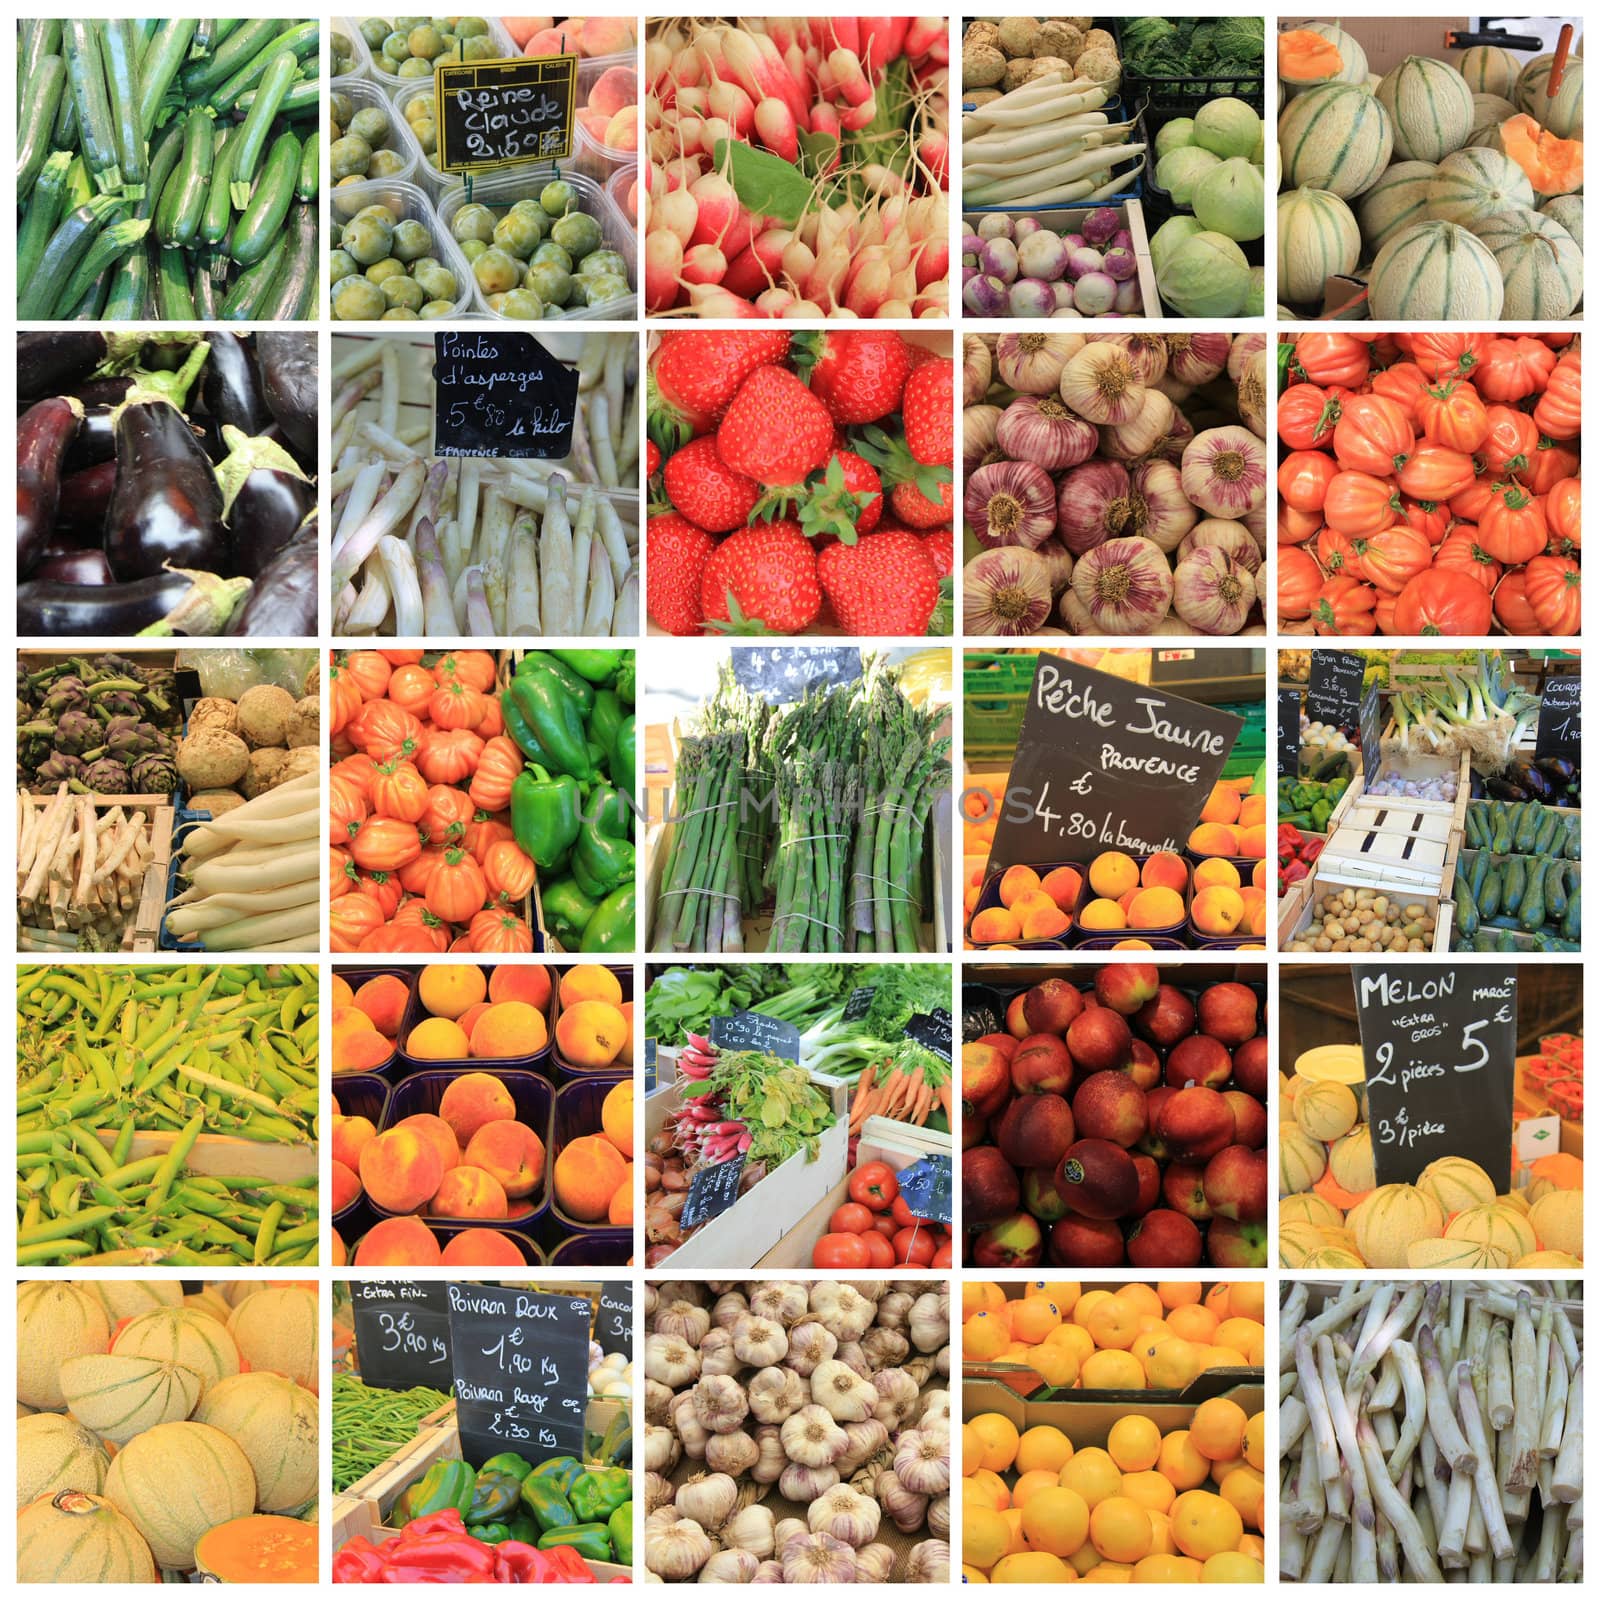 XL-collage made from 25 different high resolution fruit and vegetables images